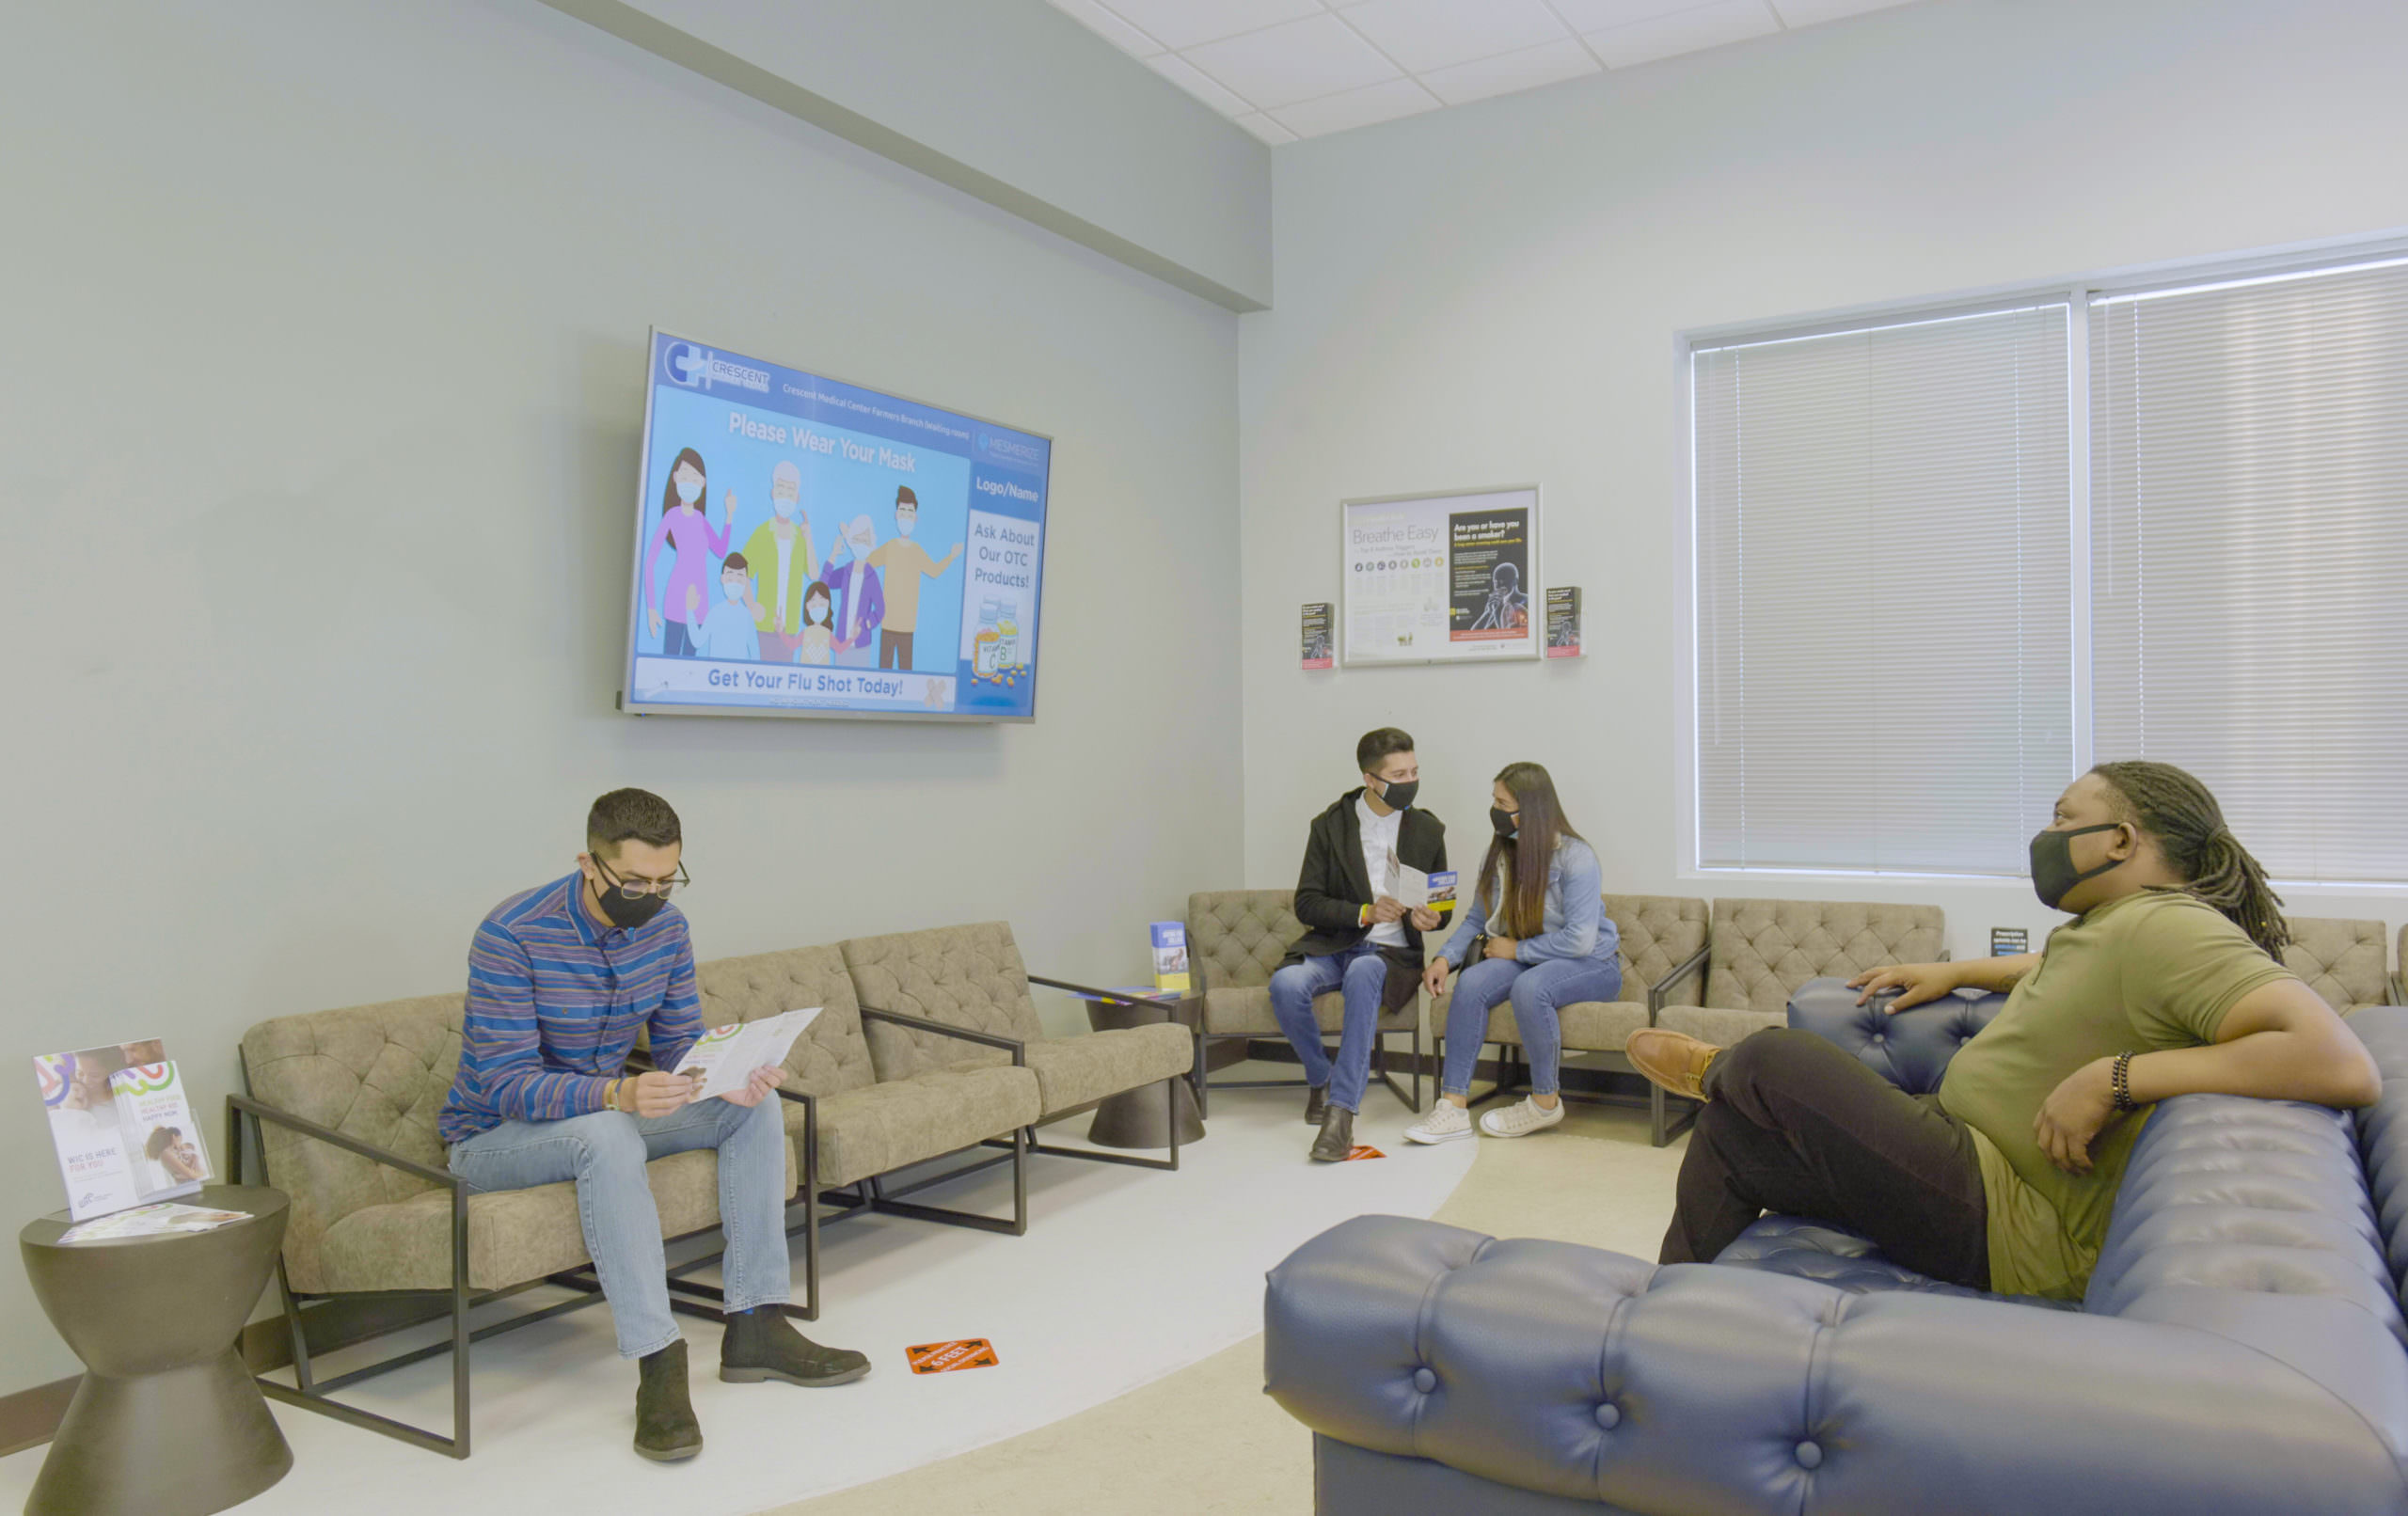 Digital screens in doctors' offices and clinics engage patients within high-traffic waiting and exam rooms.